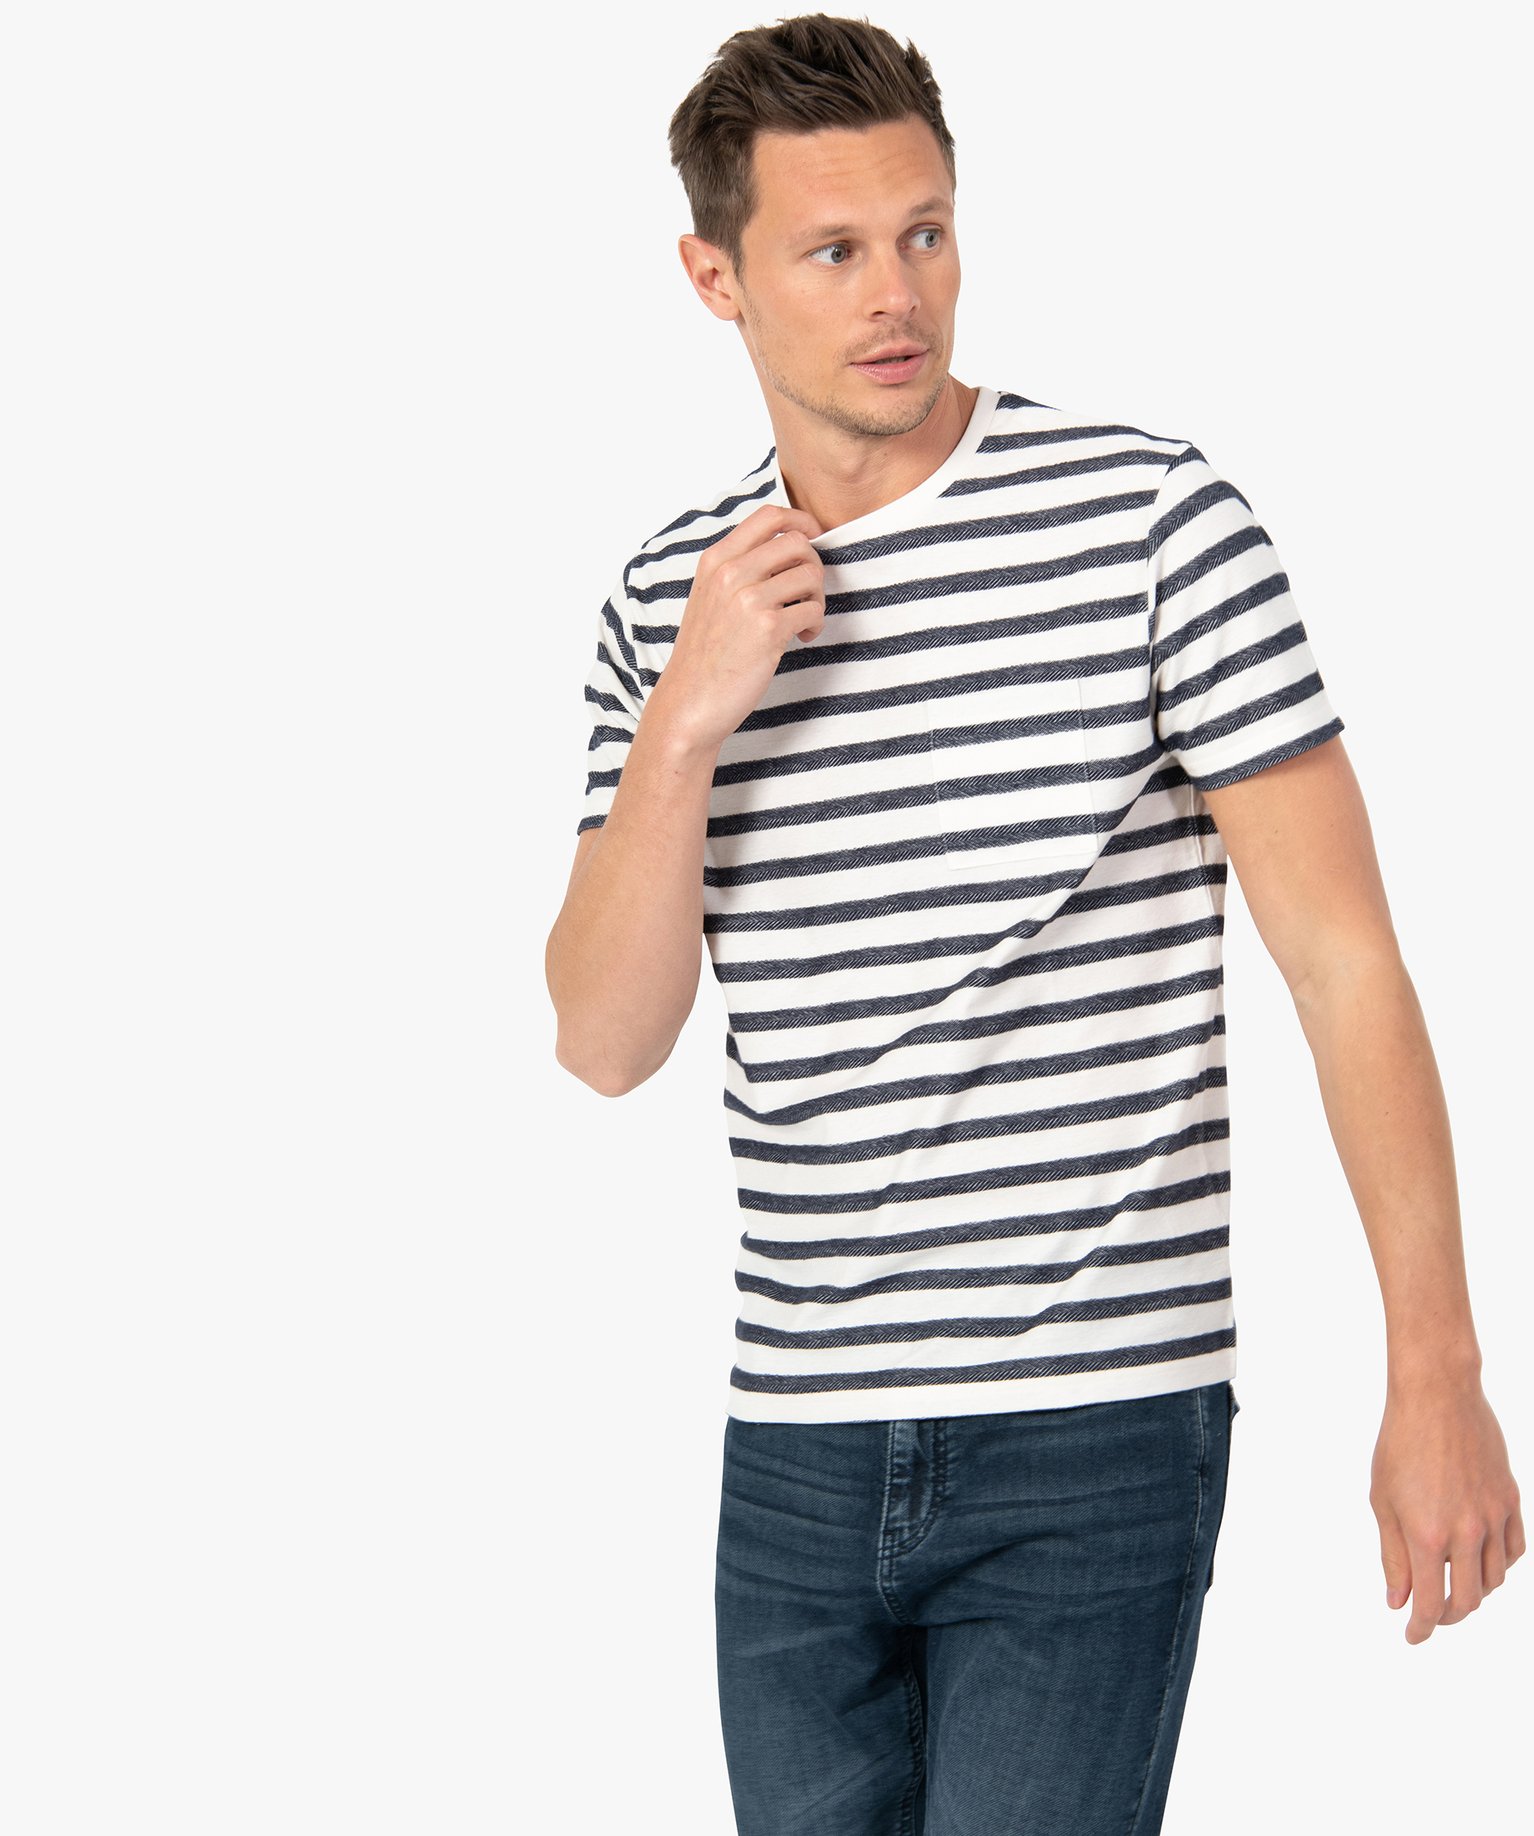 tee-shirt homme a manches courtes uni a rayures chevrons imprime tee-shirts